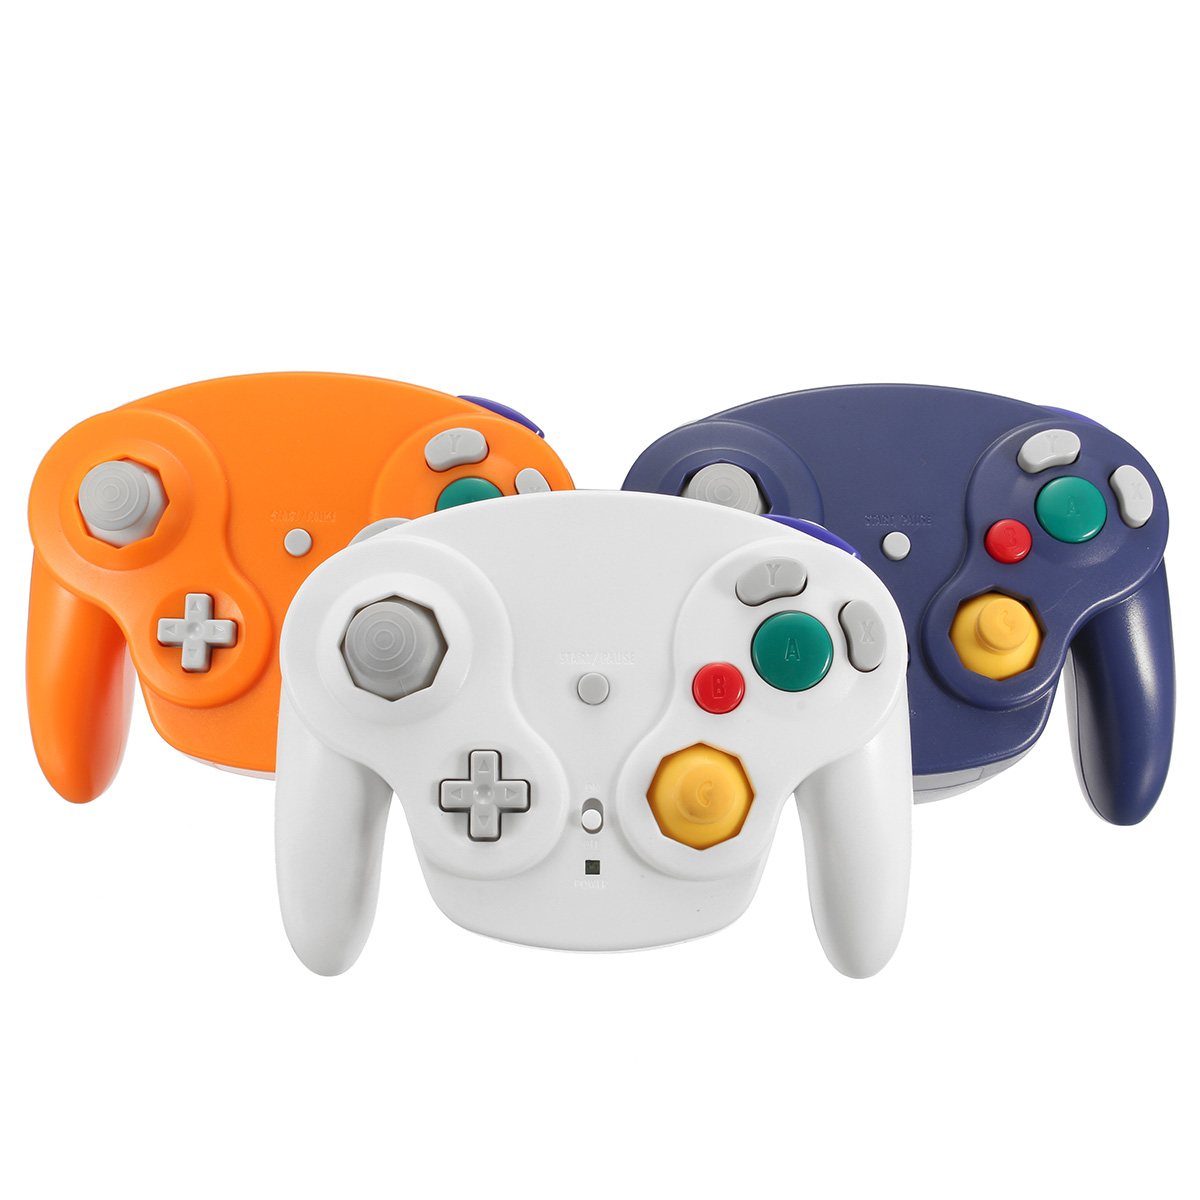 2.4Ghz Wireless Controller Game Gamepad For Nintendo Gamecube NGC Wii 9